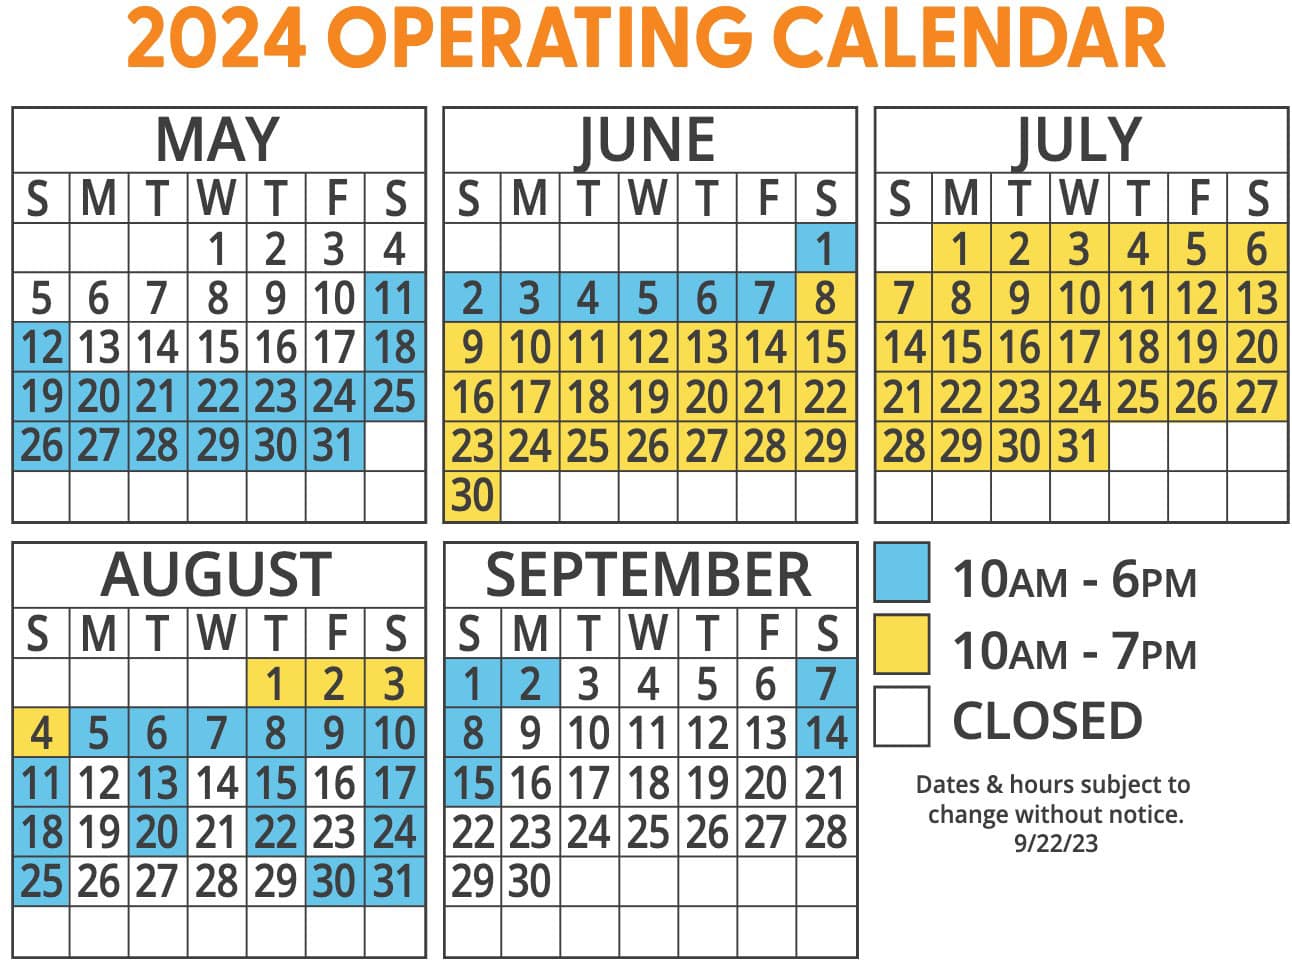 splash country calendar 2024 with open days and hours